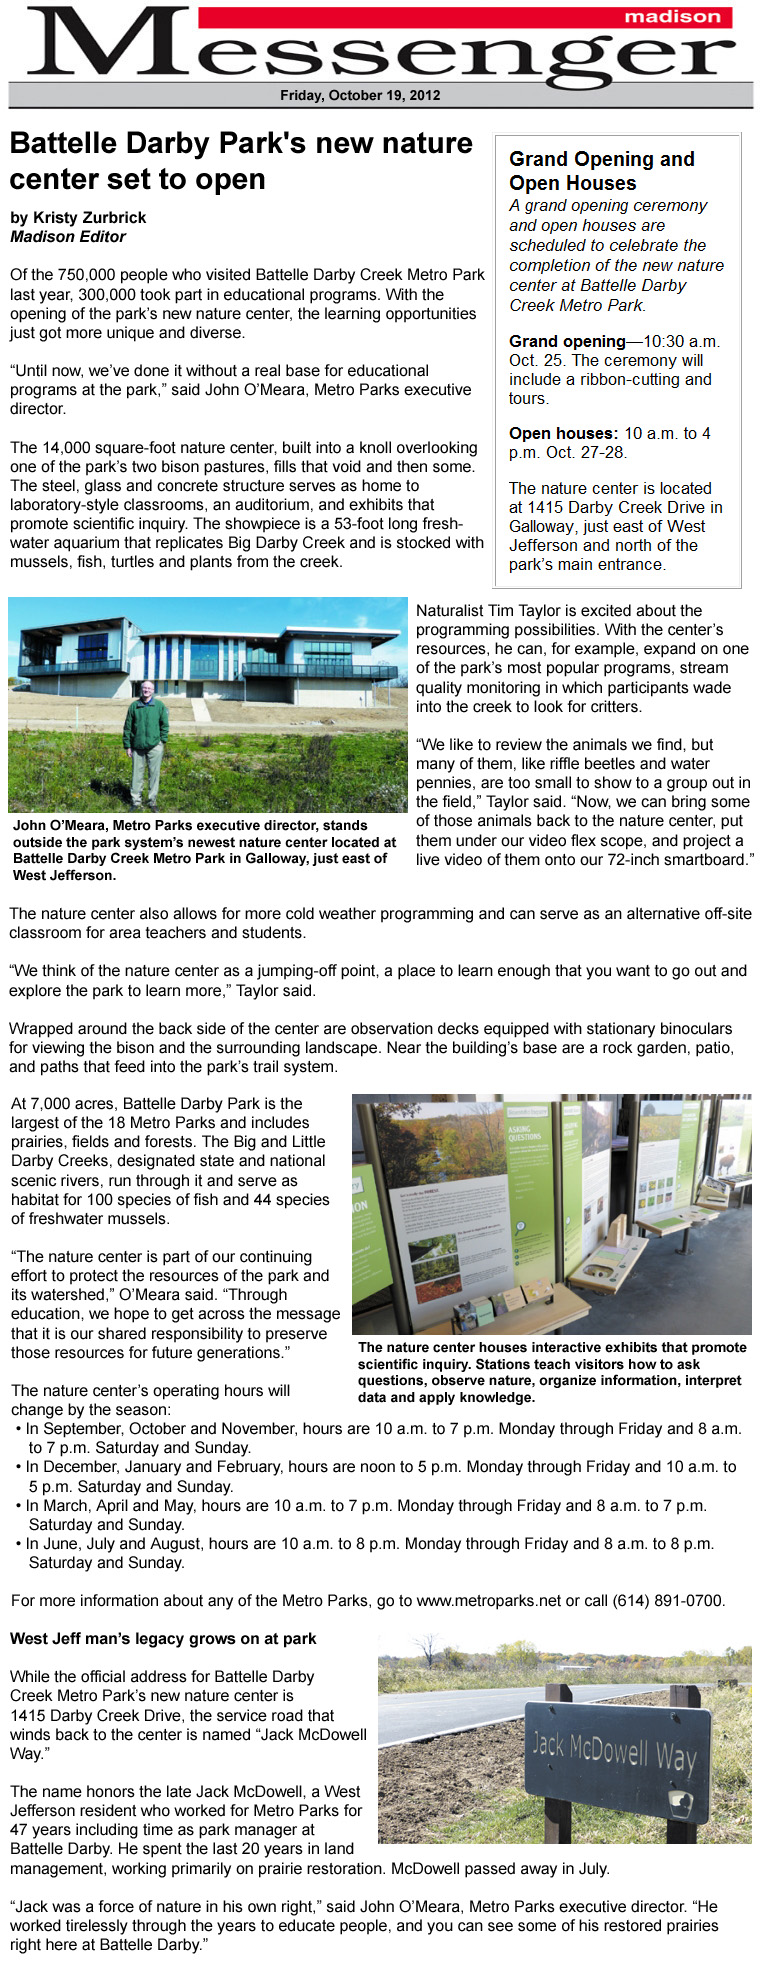 10-19-12  Madison Messenger article: Battelle Darby Park's new nature center set to open